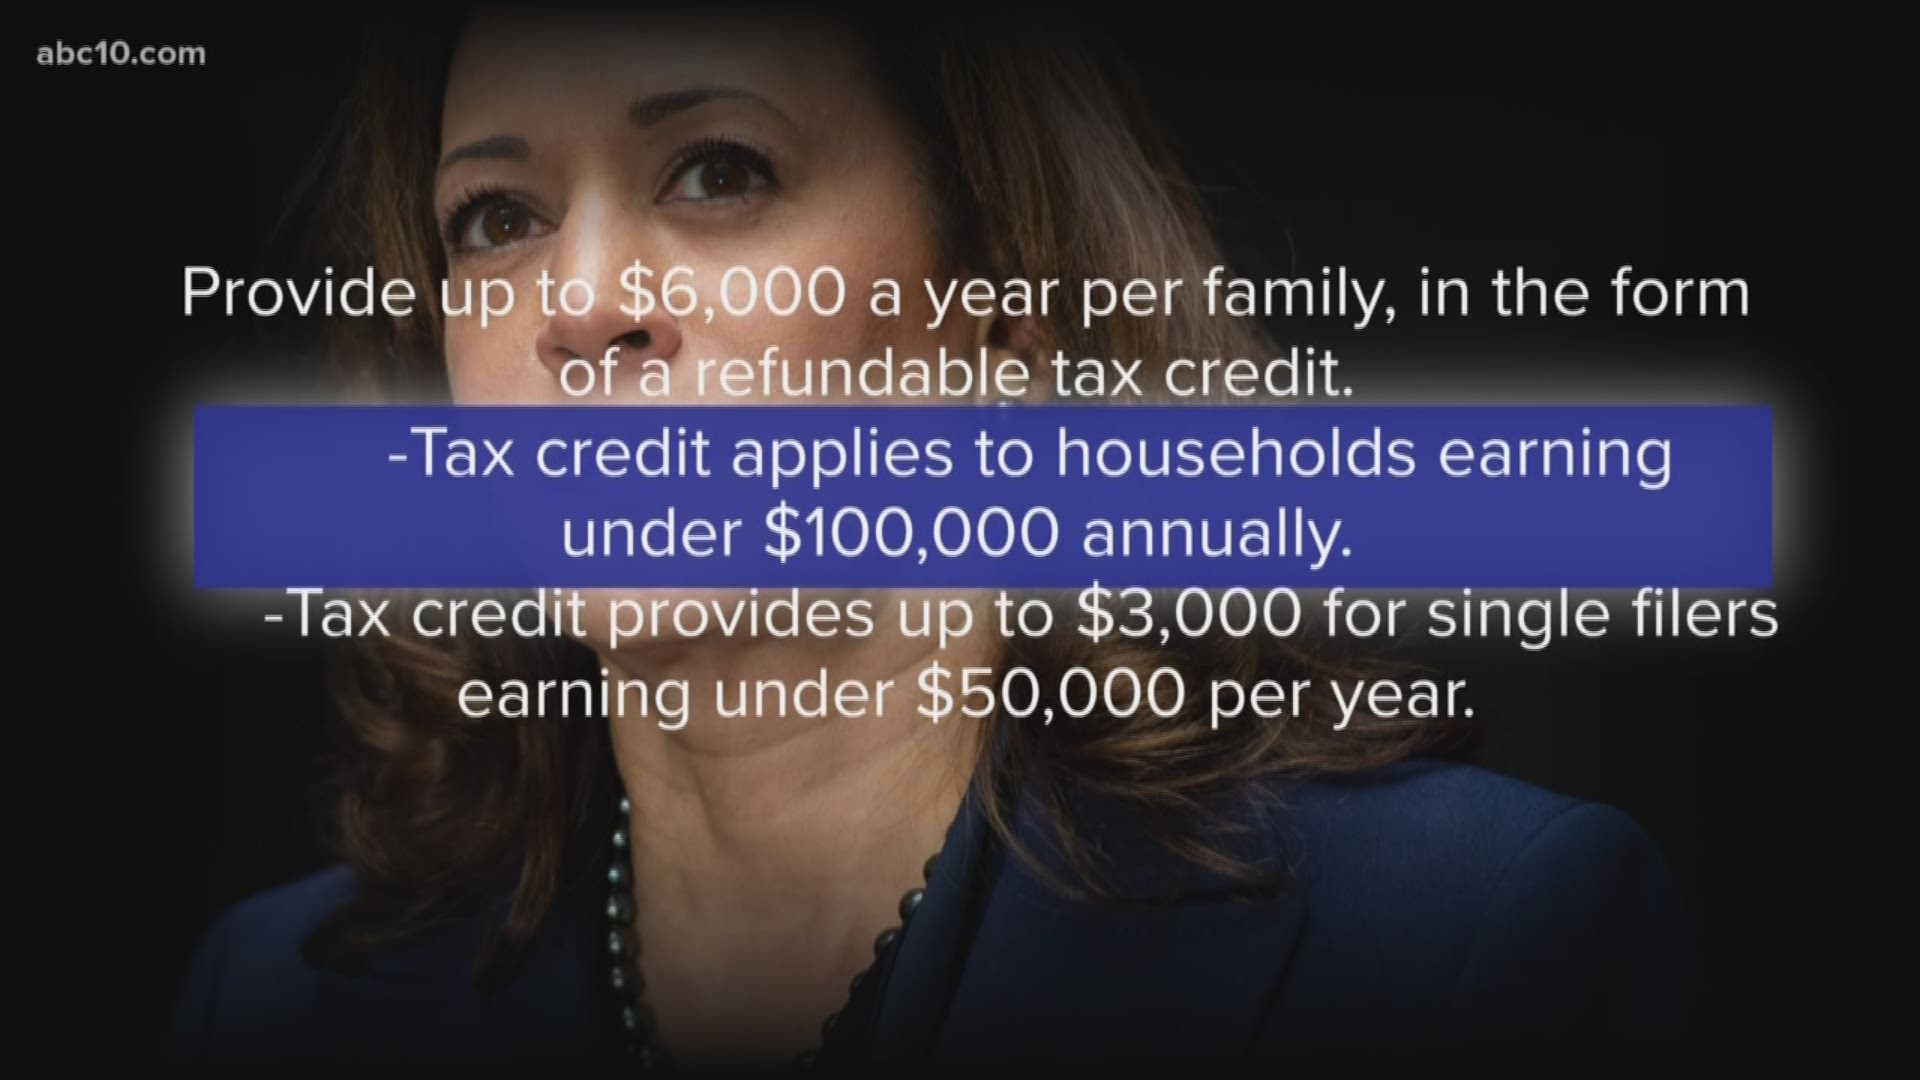 A sweeping tax plan that would provide up to $6,000 per year for middle and working-class families was proposed, Thursday, by Democratic California Senator Kamala Harris.